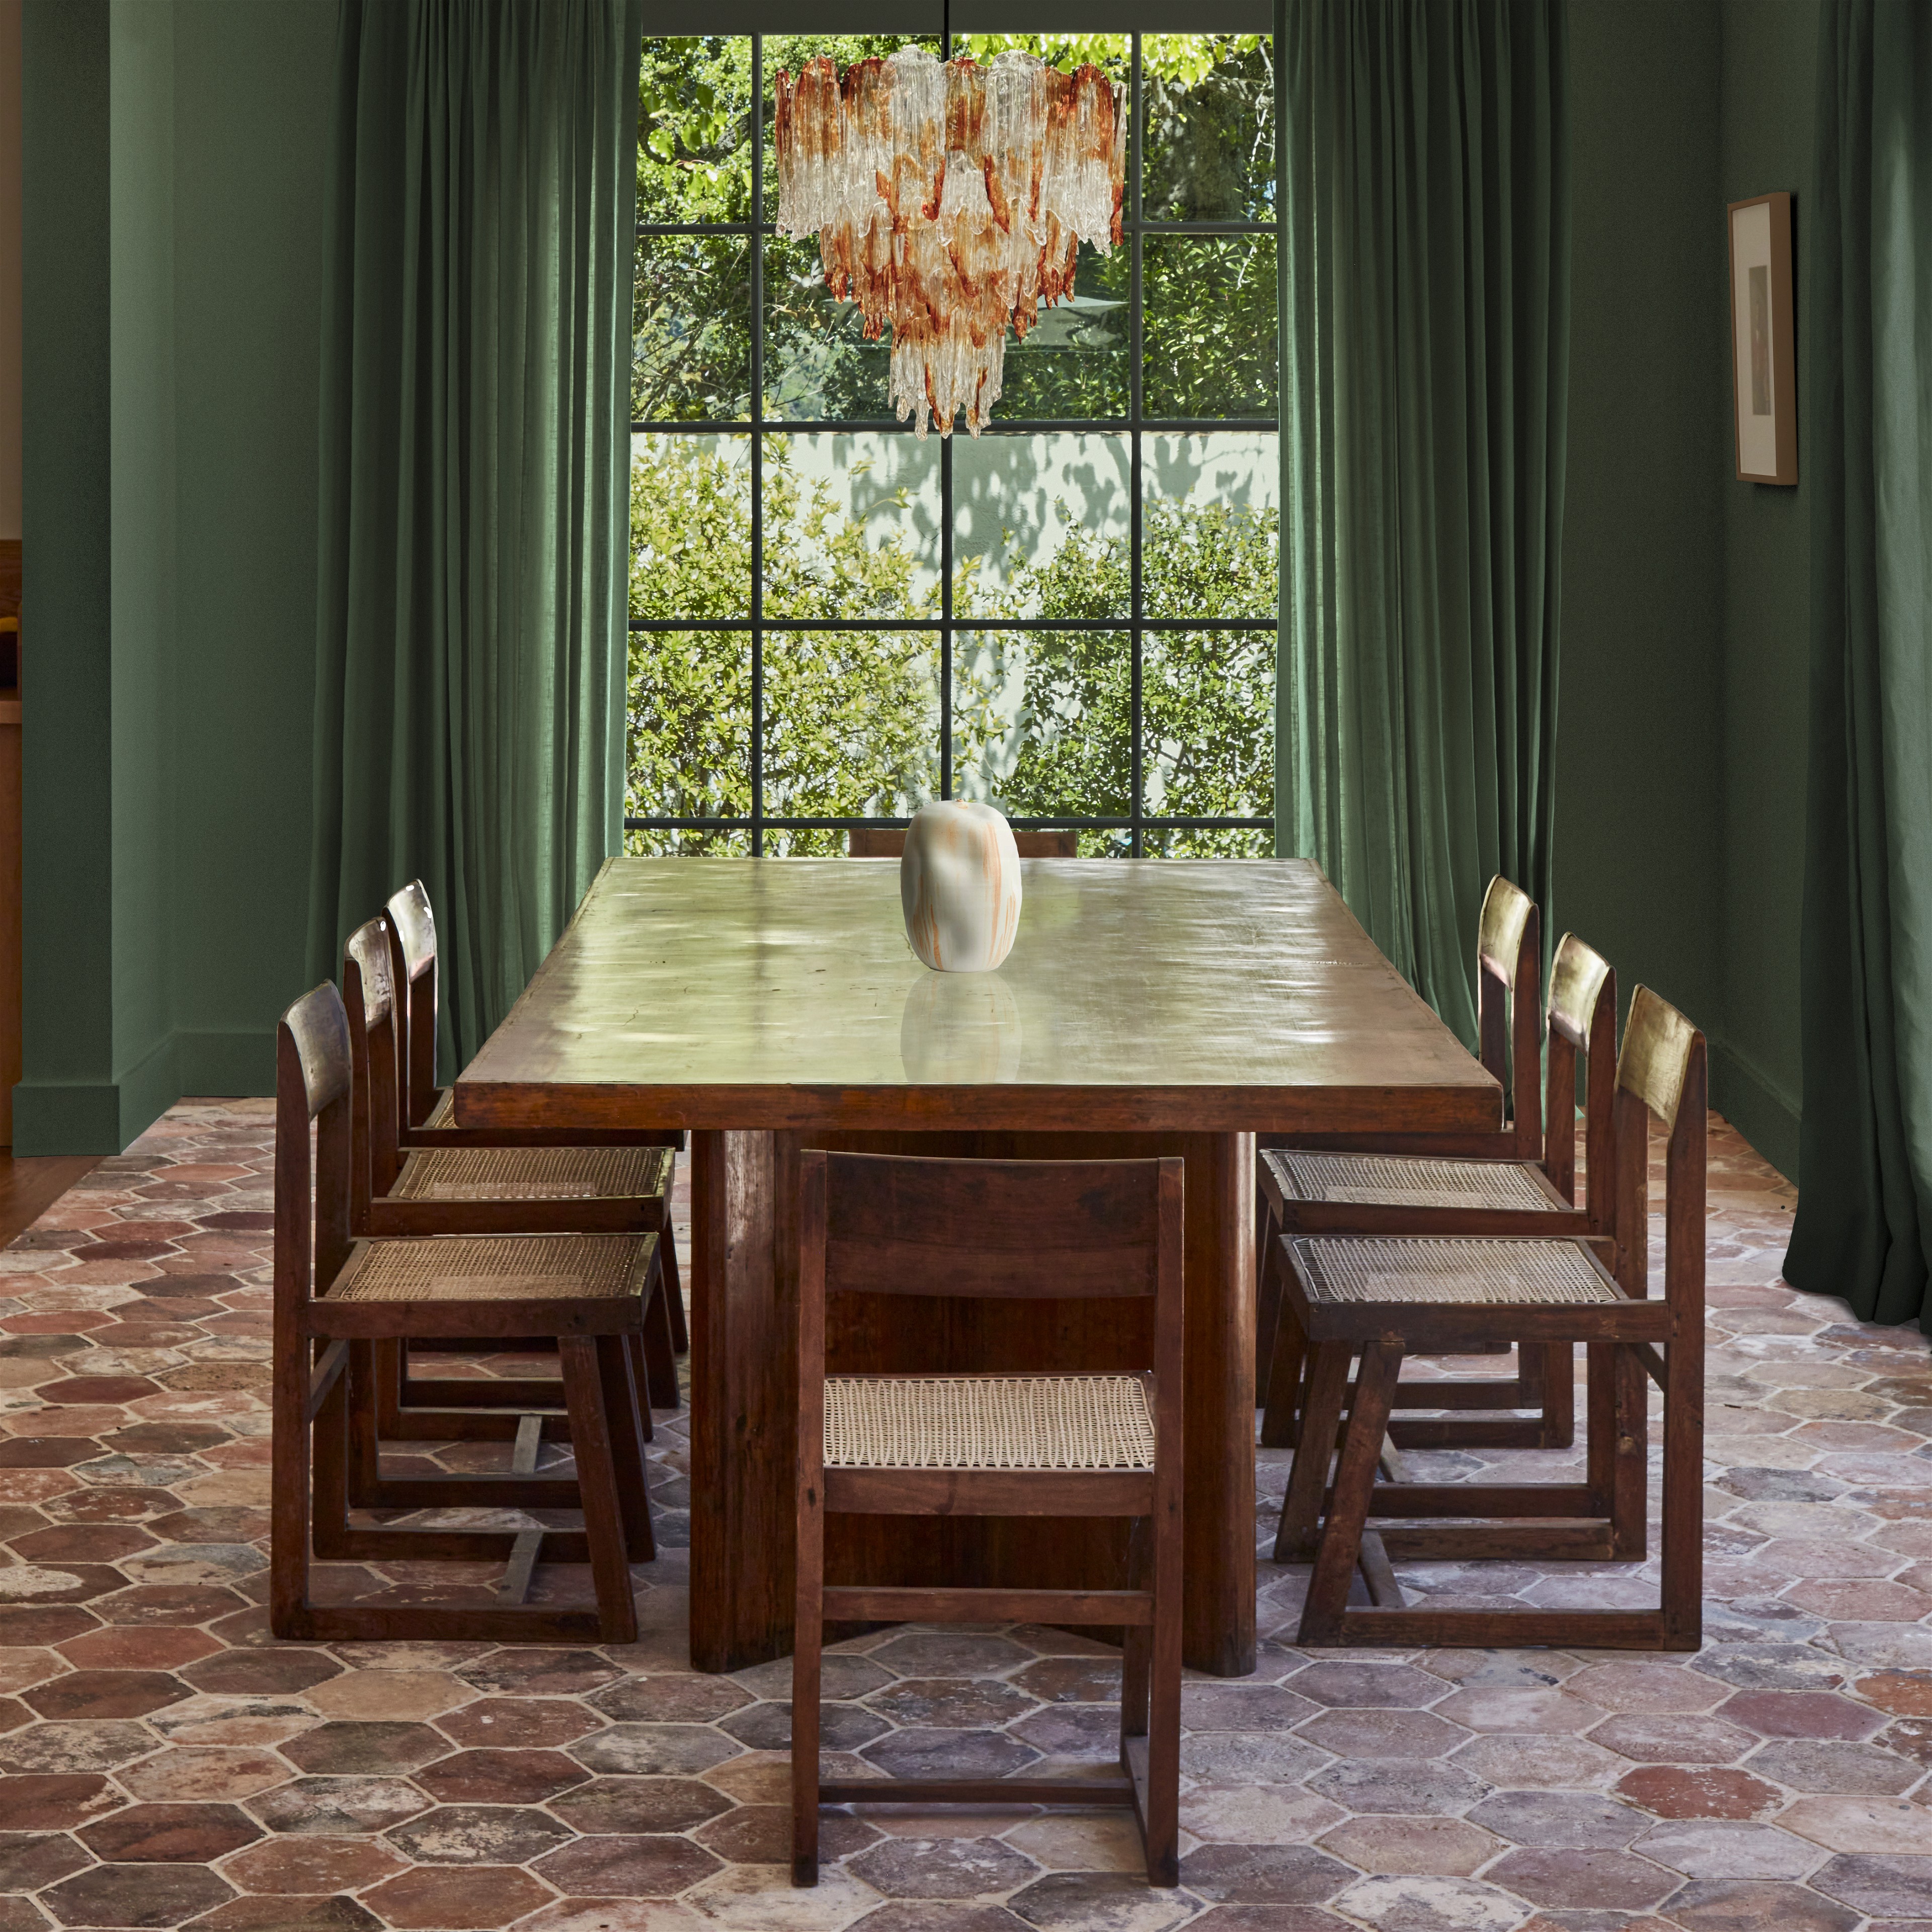 a dining room with a large wooden table and chairs